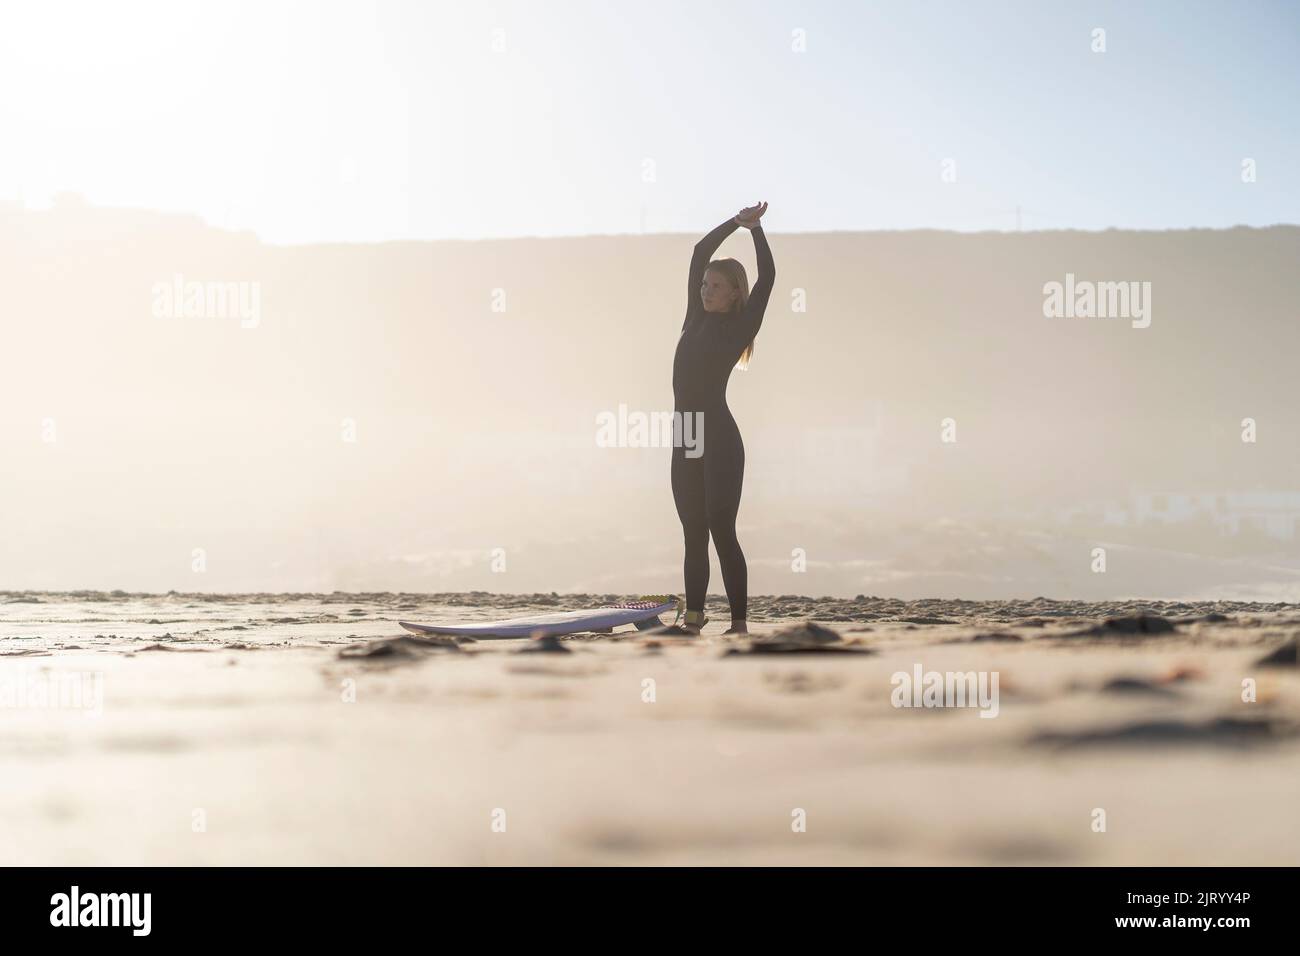 Surfer at the beach. Surfer girl warming up with surfboard on the beach. Morning light beautiful sunrise colors. Stock Photo